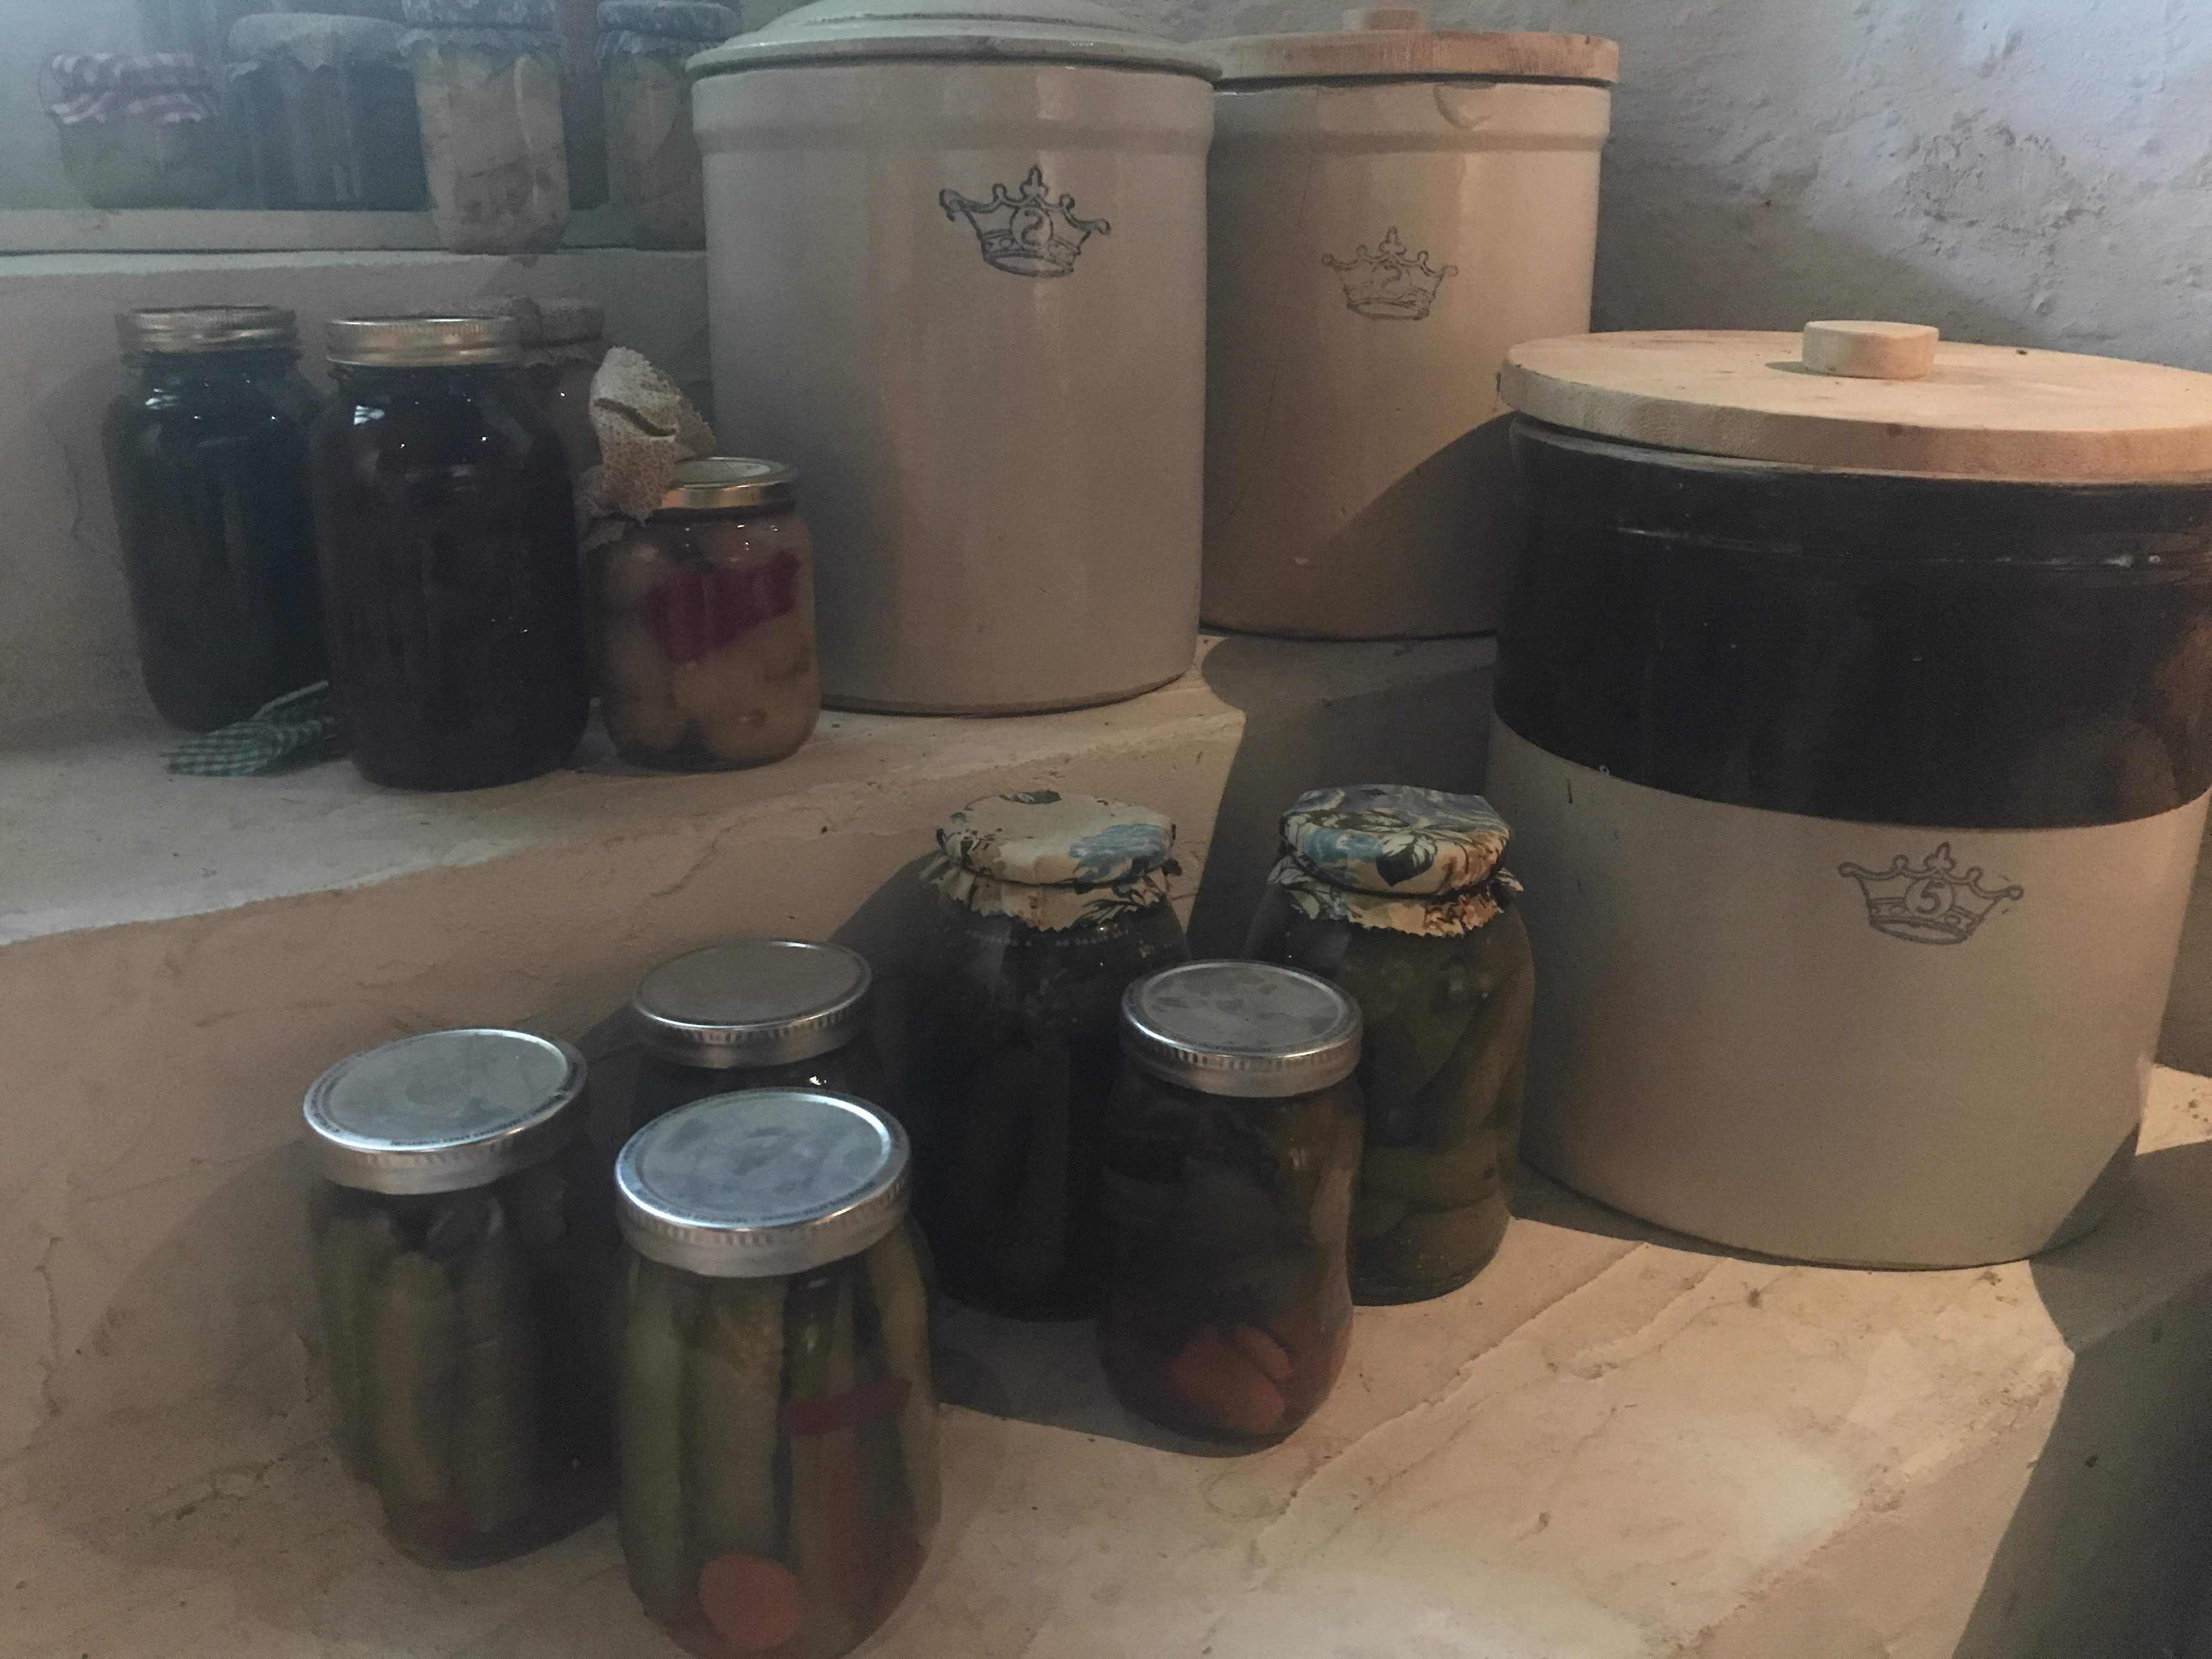 Preserves sitting in front of a group of crocks